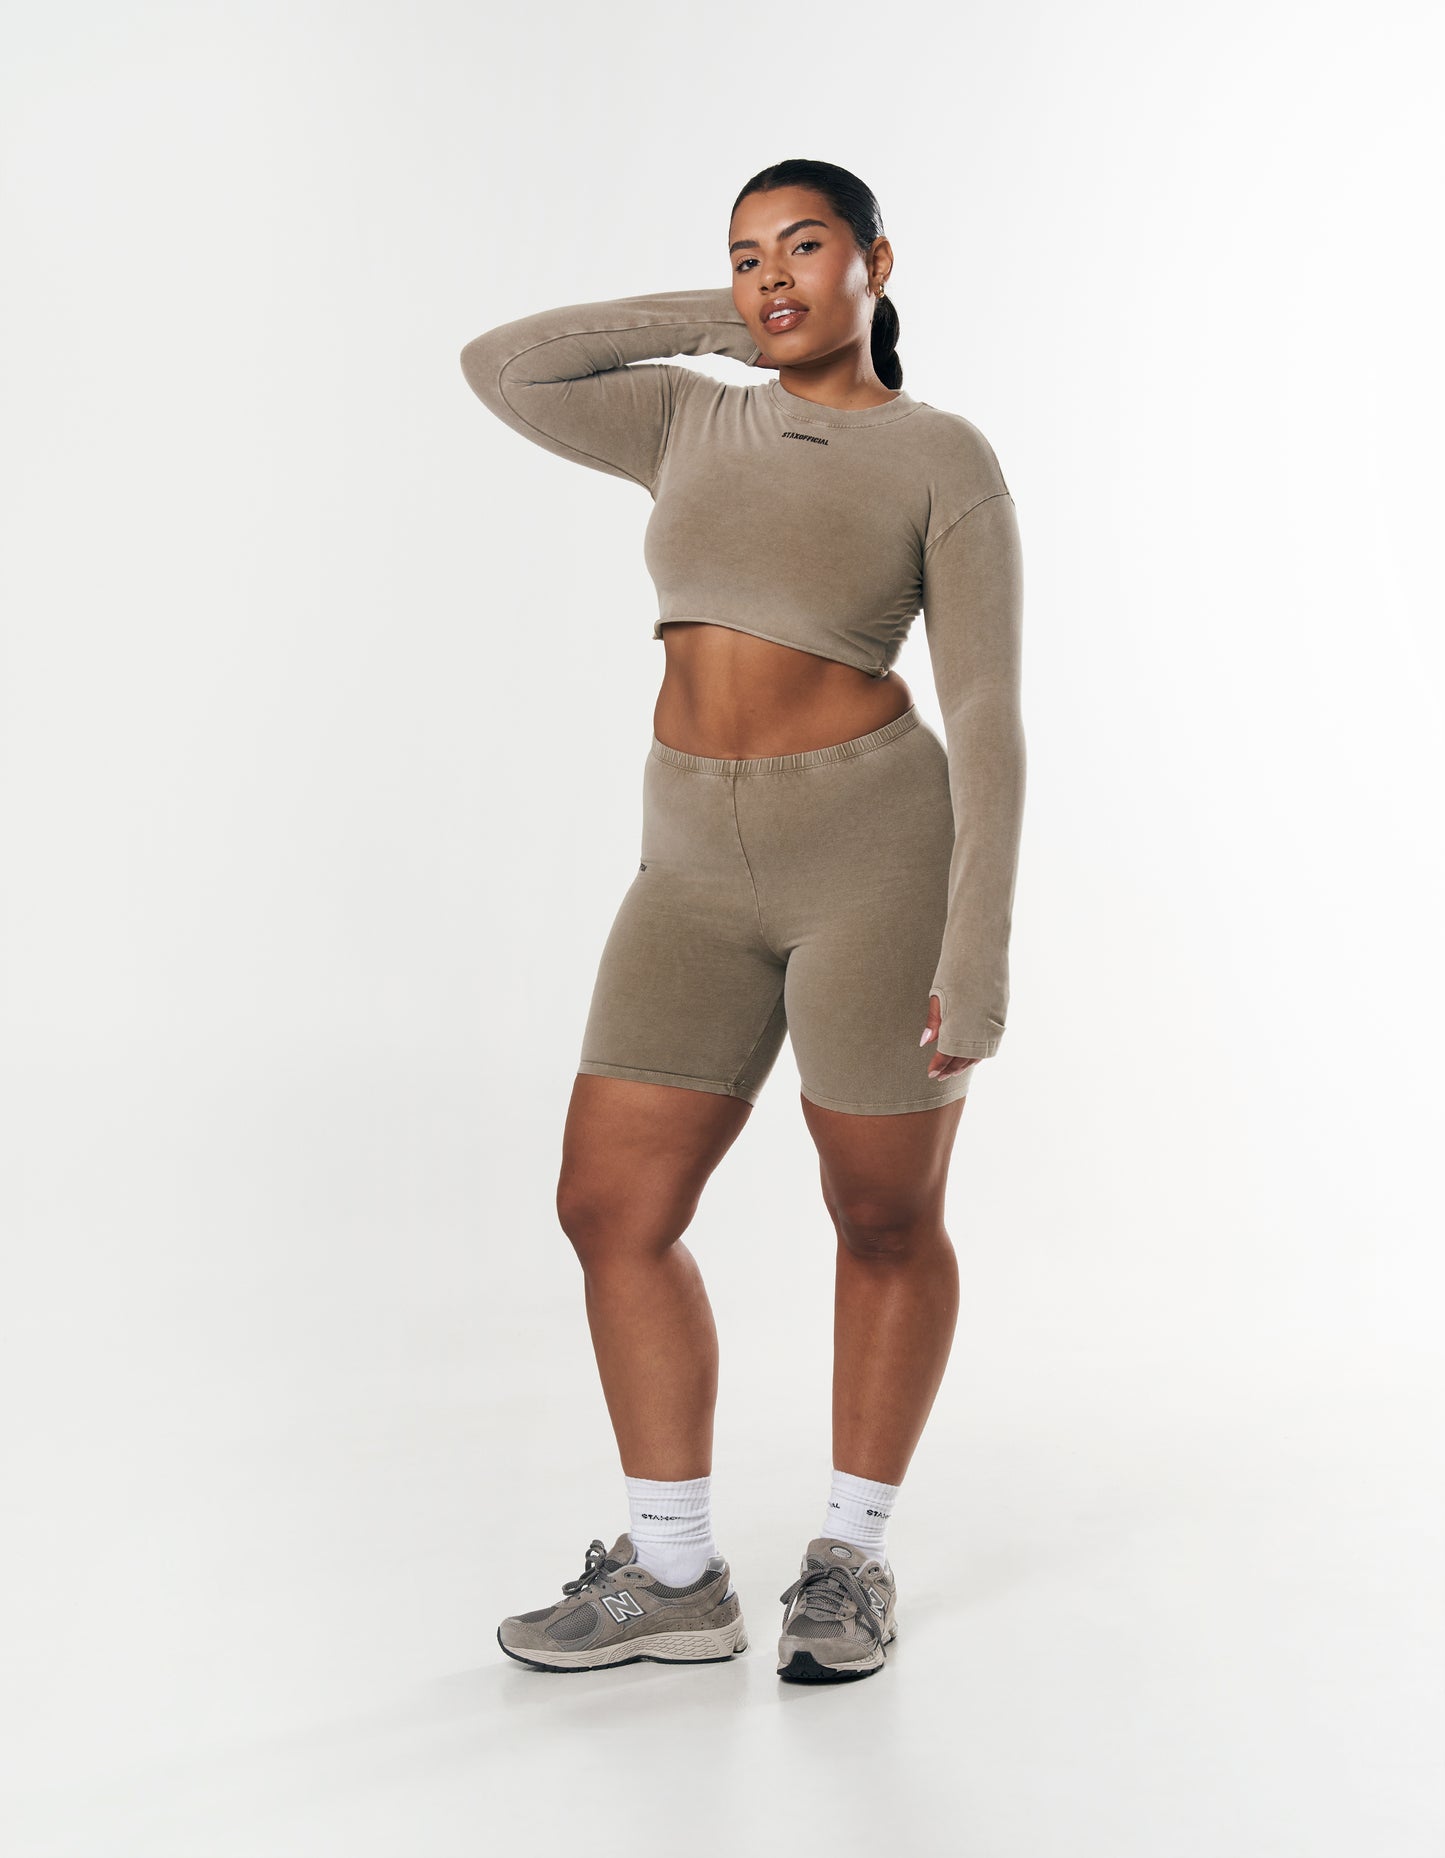 OOS Cropped Long Sleeve - Earth